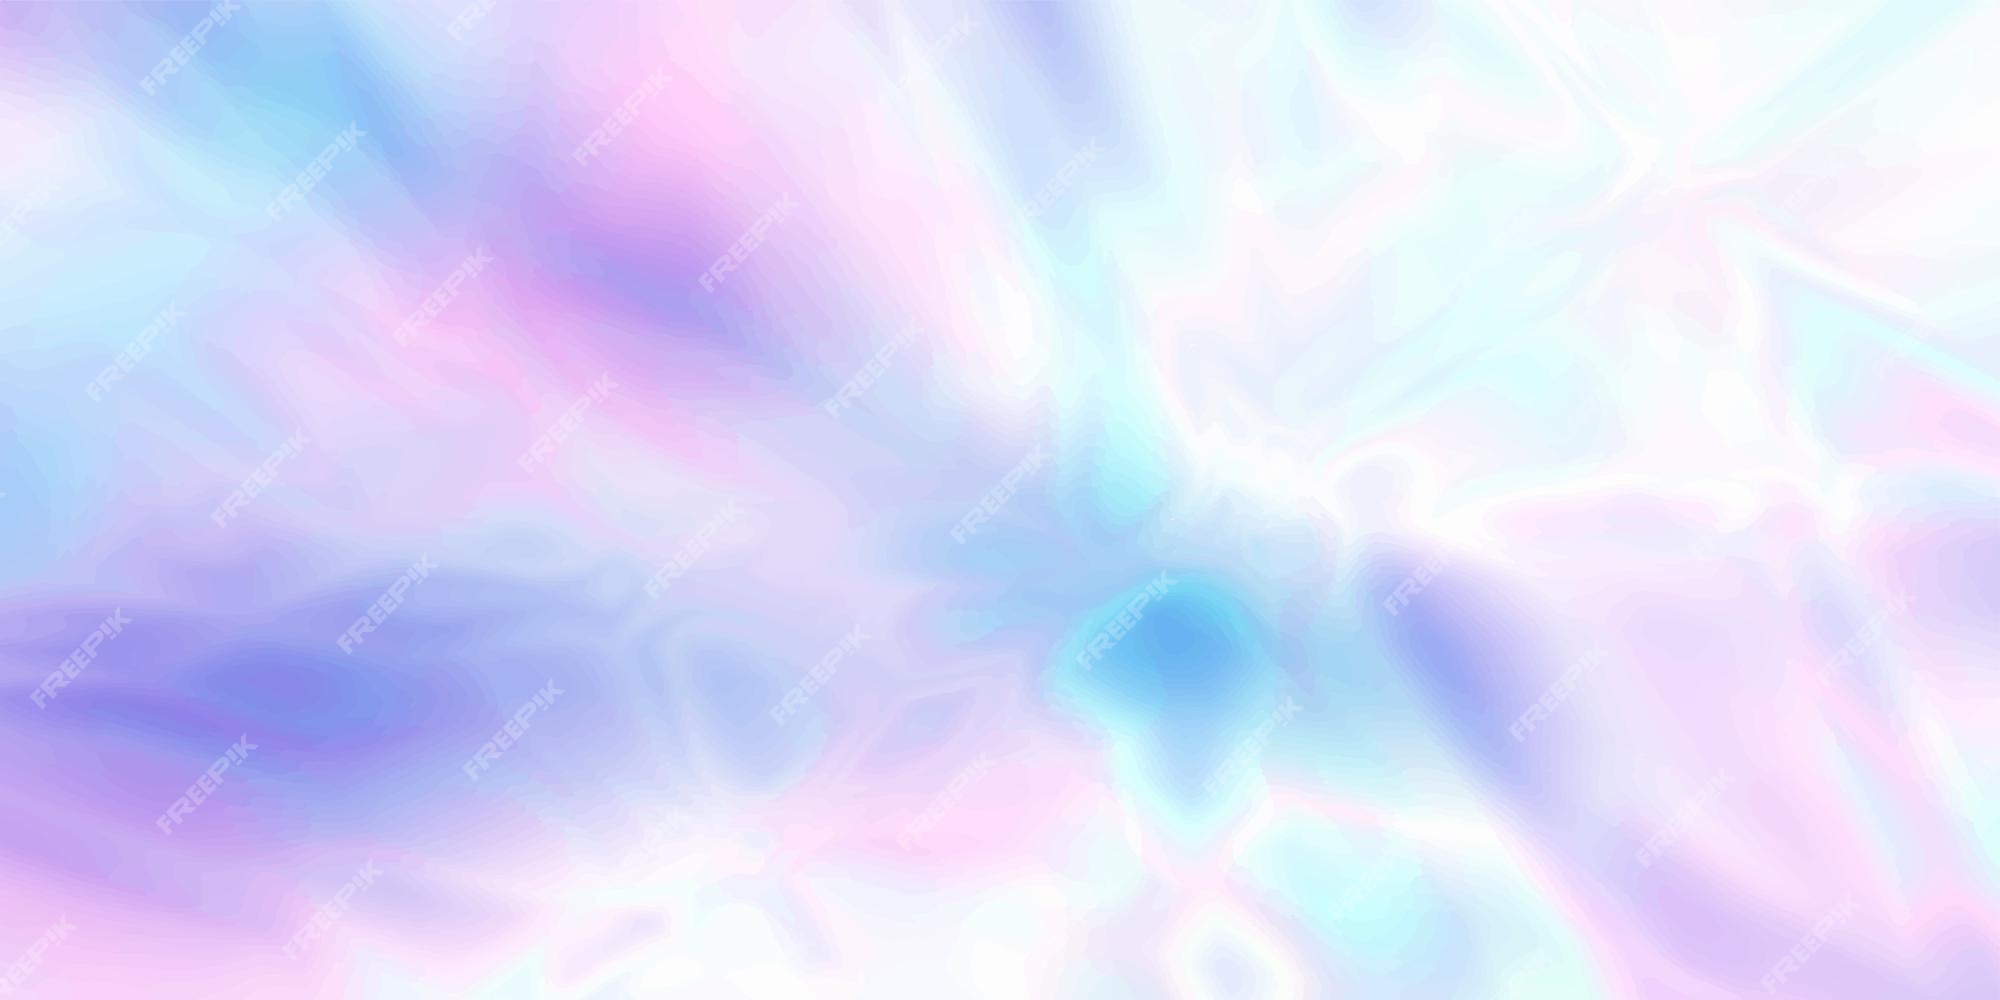 Premium Vector | Blurred holographic abstract background in light colors.  trendy wallpaper - hipster style. vector illustration for modern style  trends, for creative project design : web design or printed products